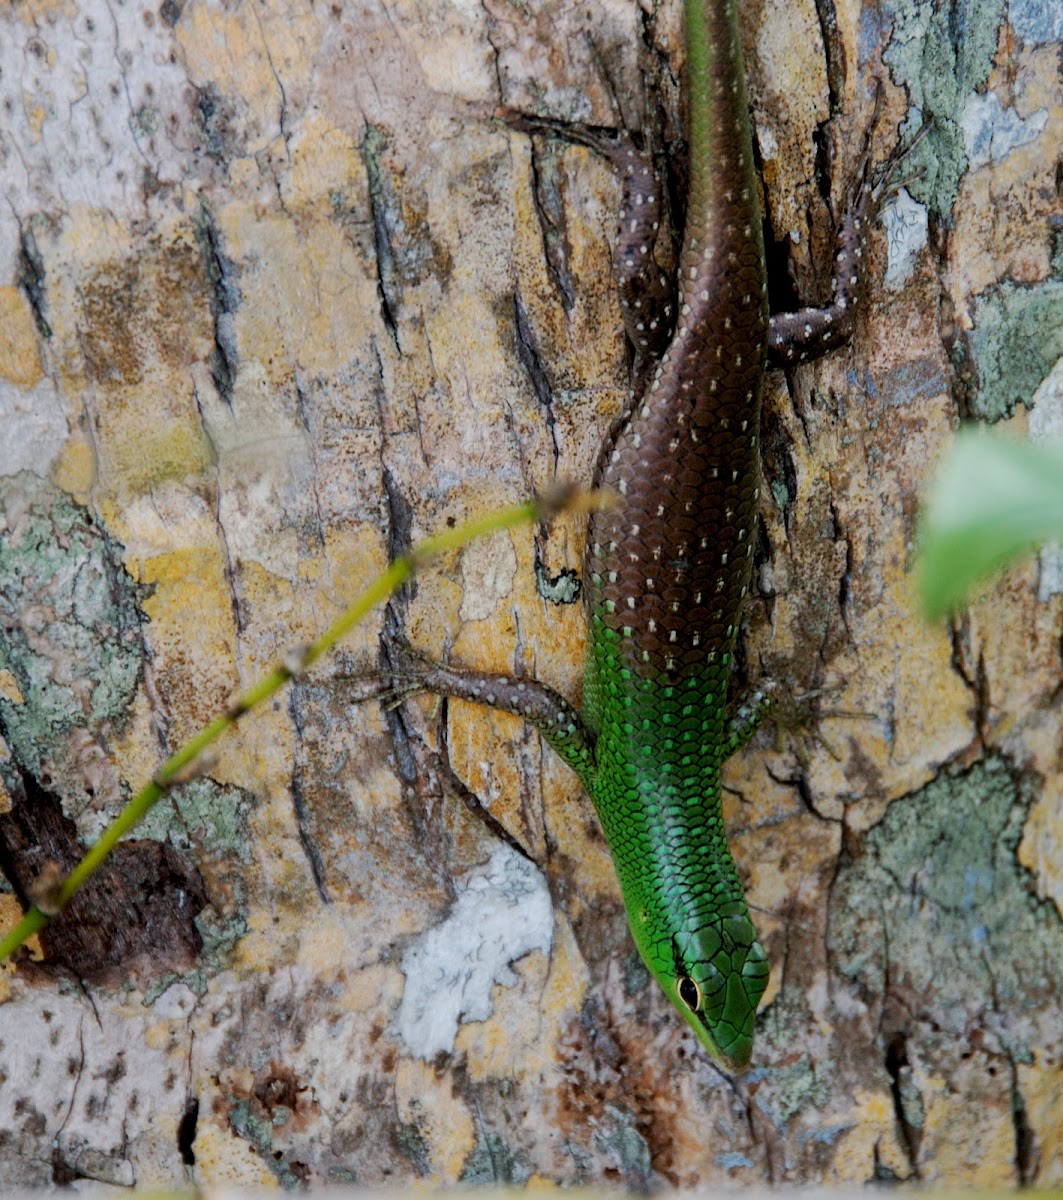 Philippine Spotted Green Tree Skink